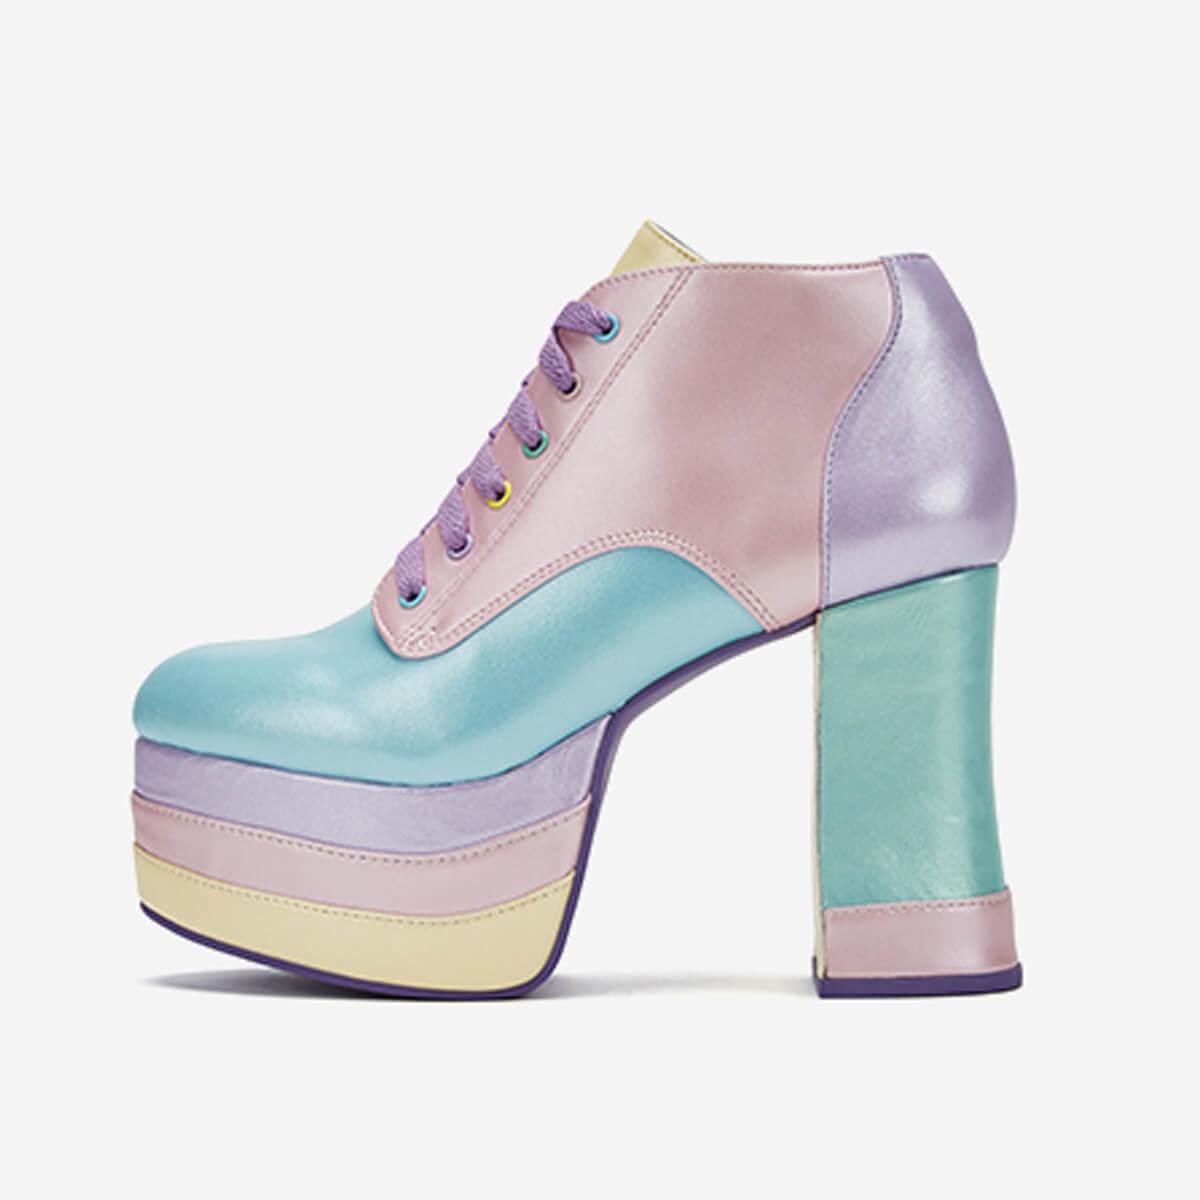 Pastel Cute Aesthetic High Heels Shoes - Aesthetic Clothes Shop